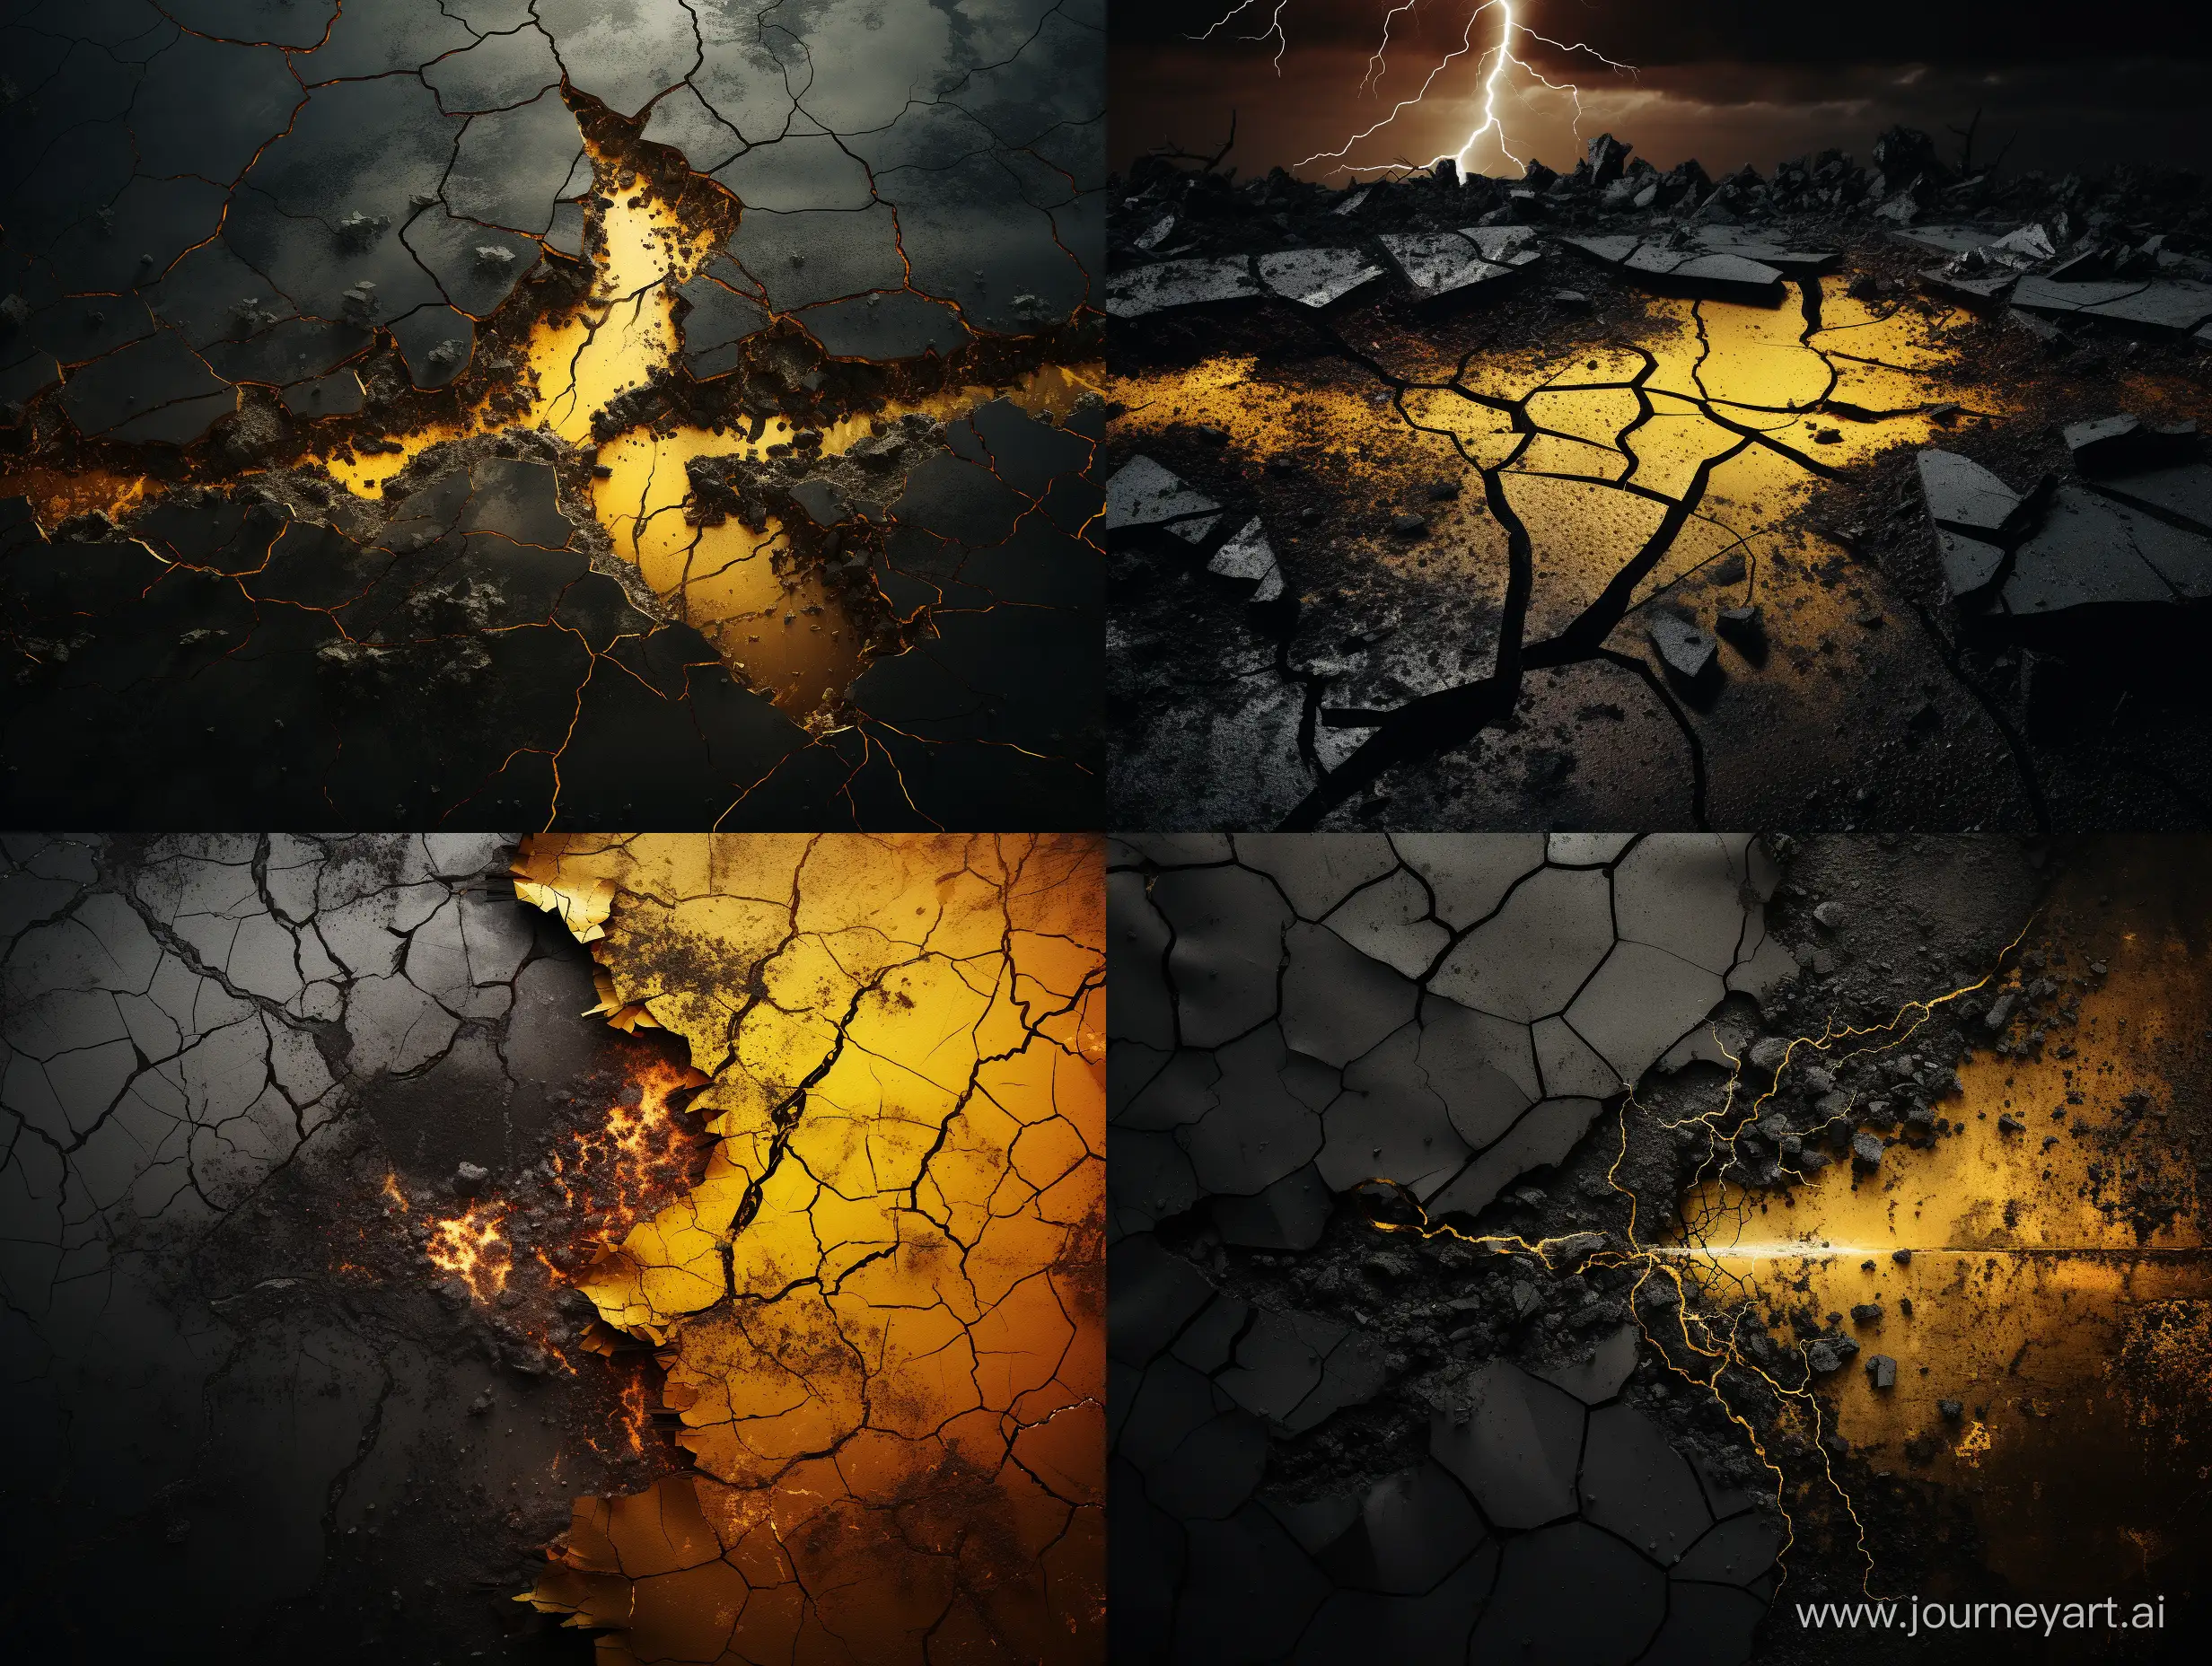 Dramatic-Lightning-Strike-Earth-Rupture-in-Black-and-Yellow-Tones